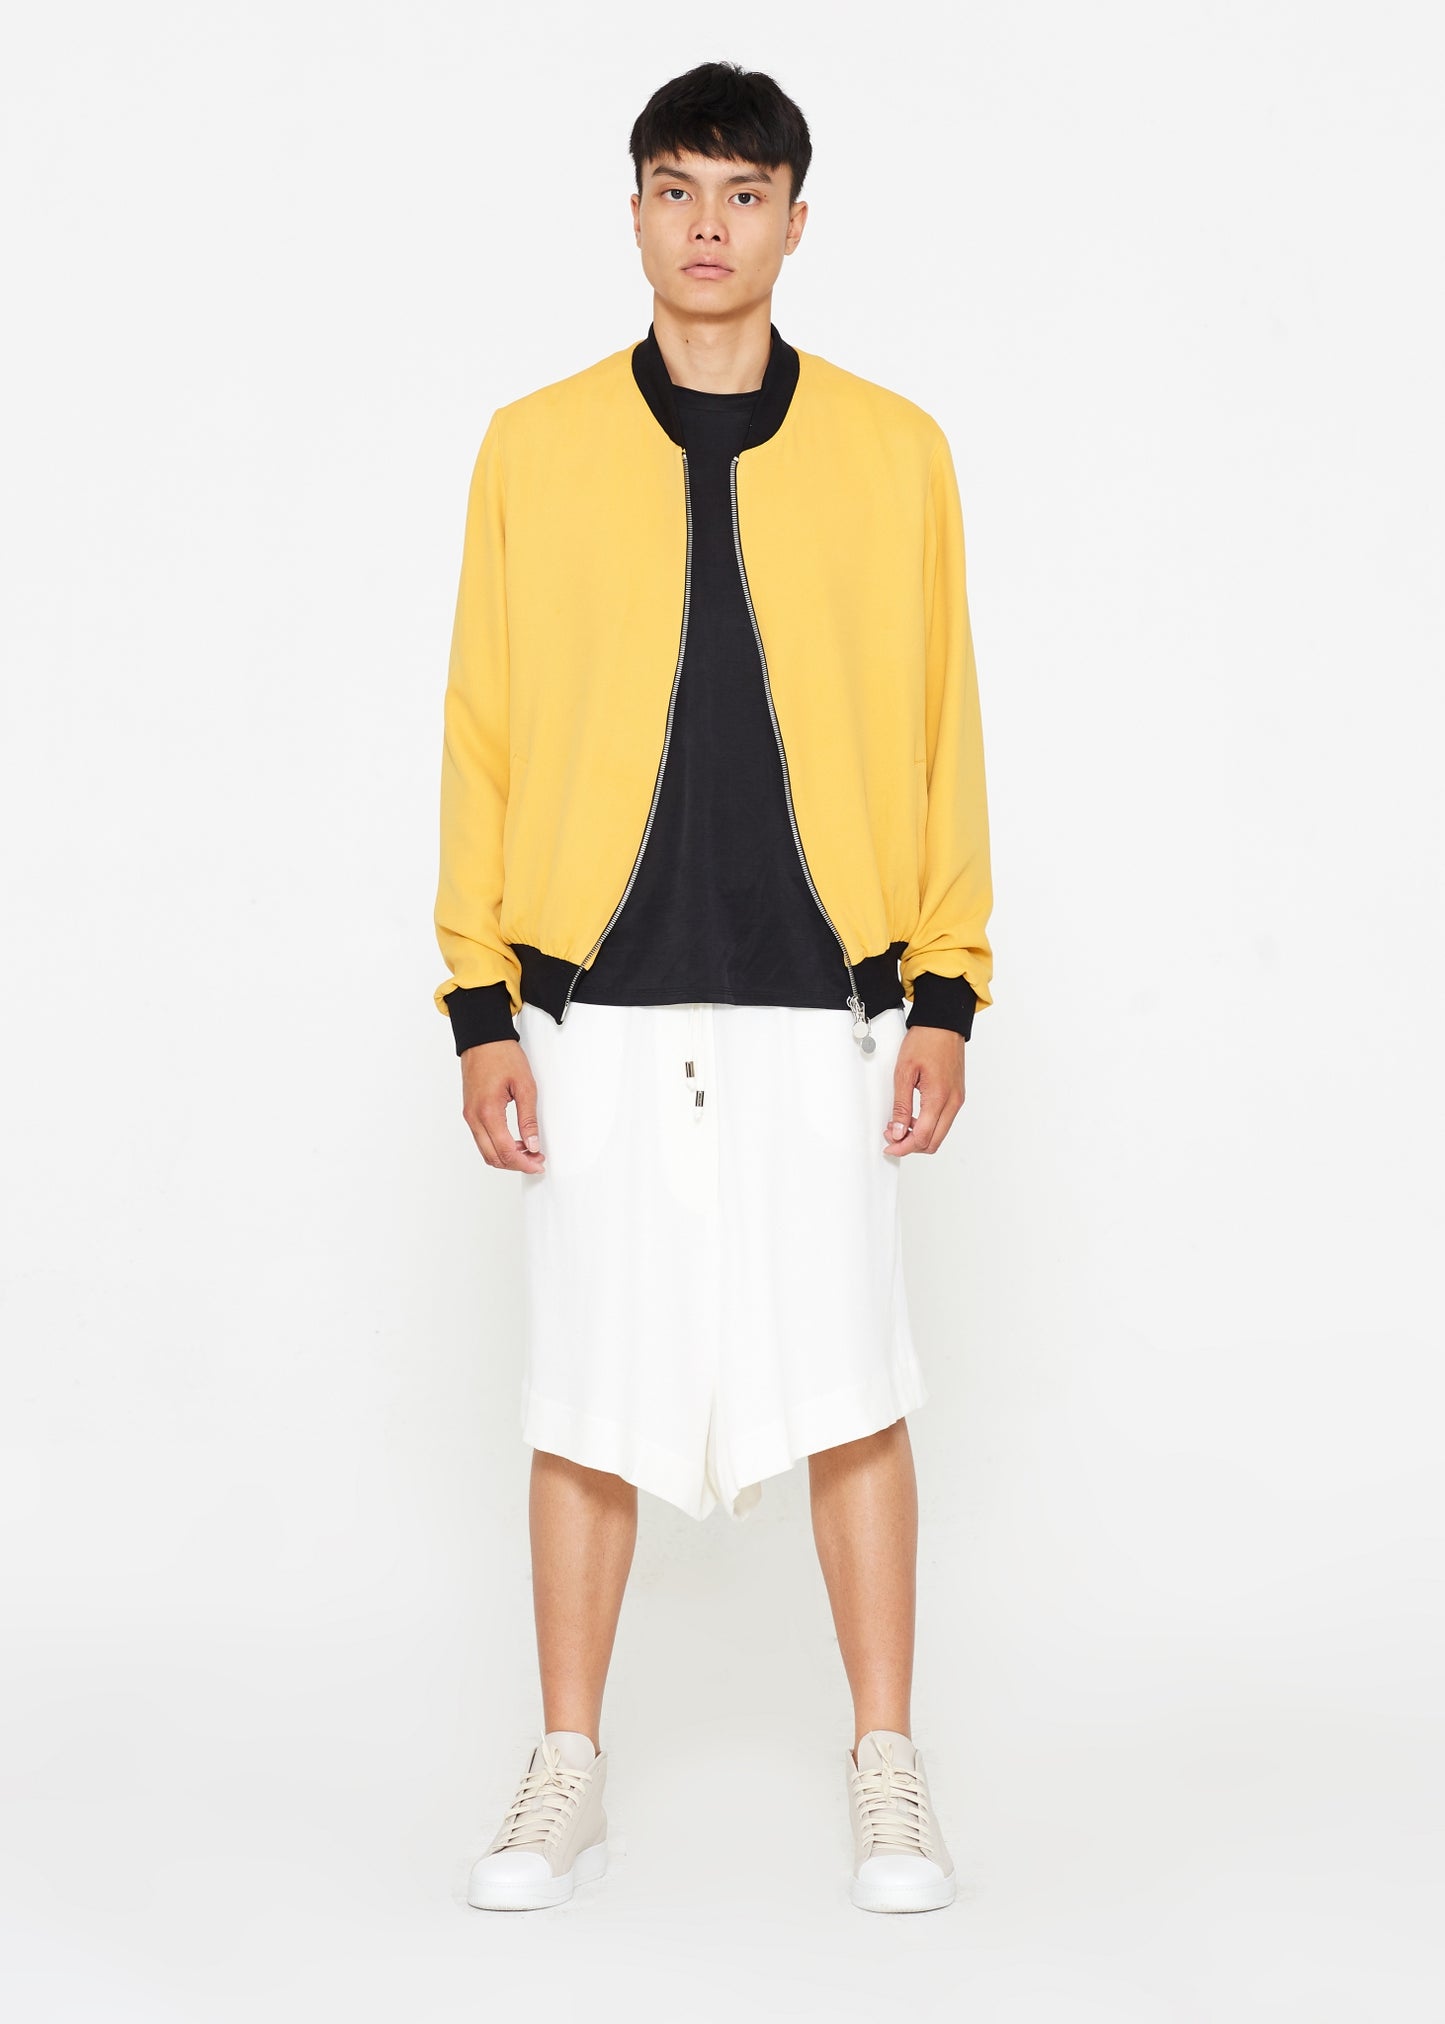 "The Limited Edition Crepe Bomber" in Sunset Yellow